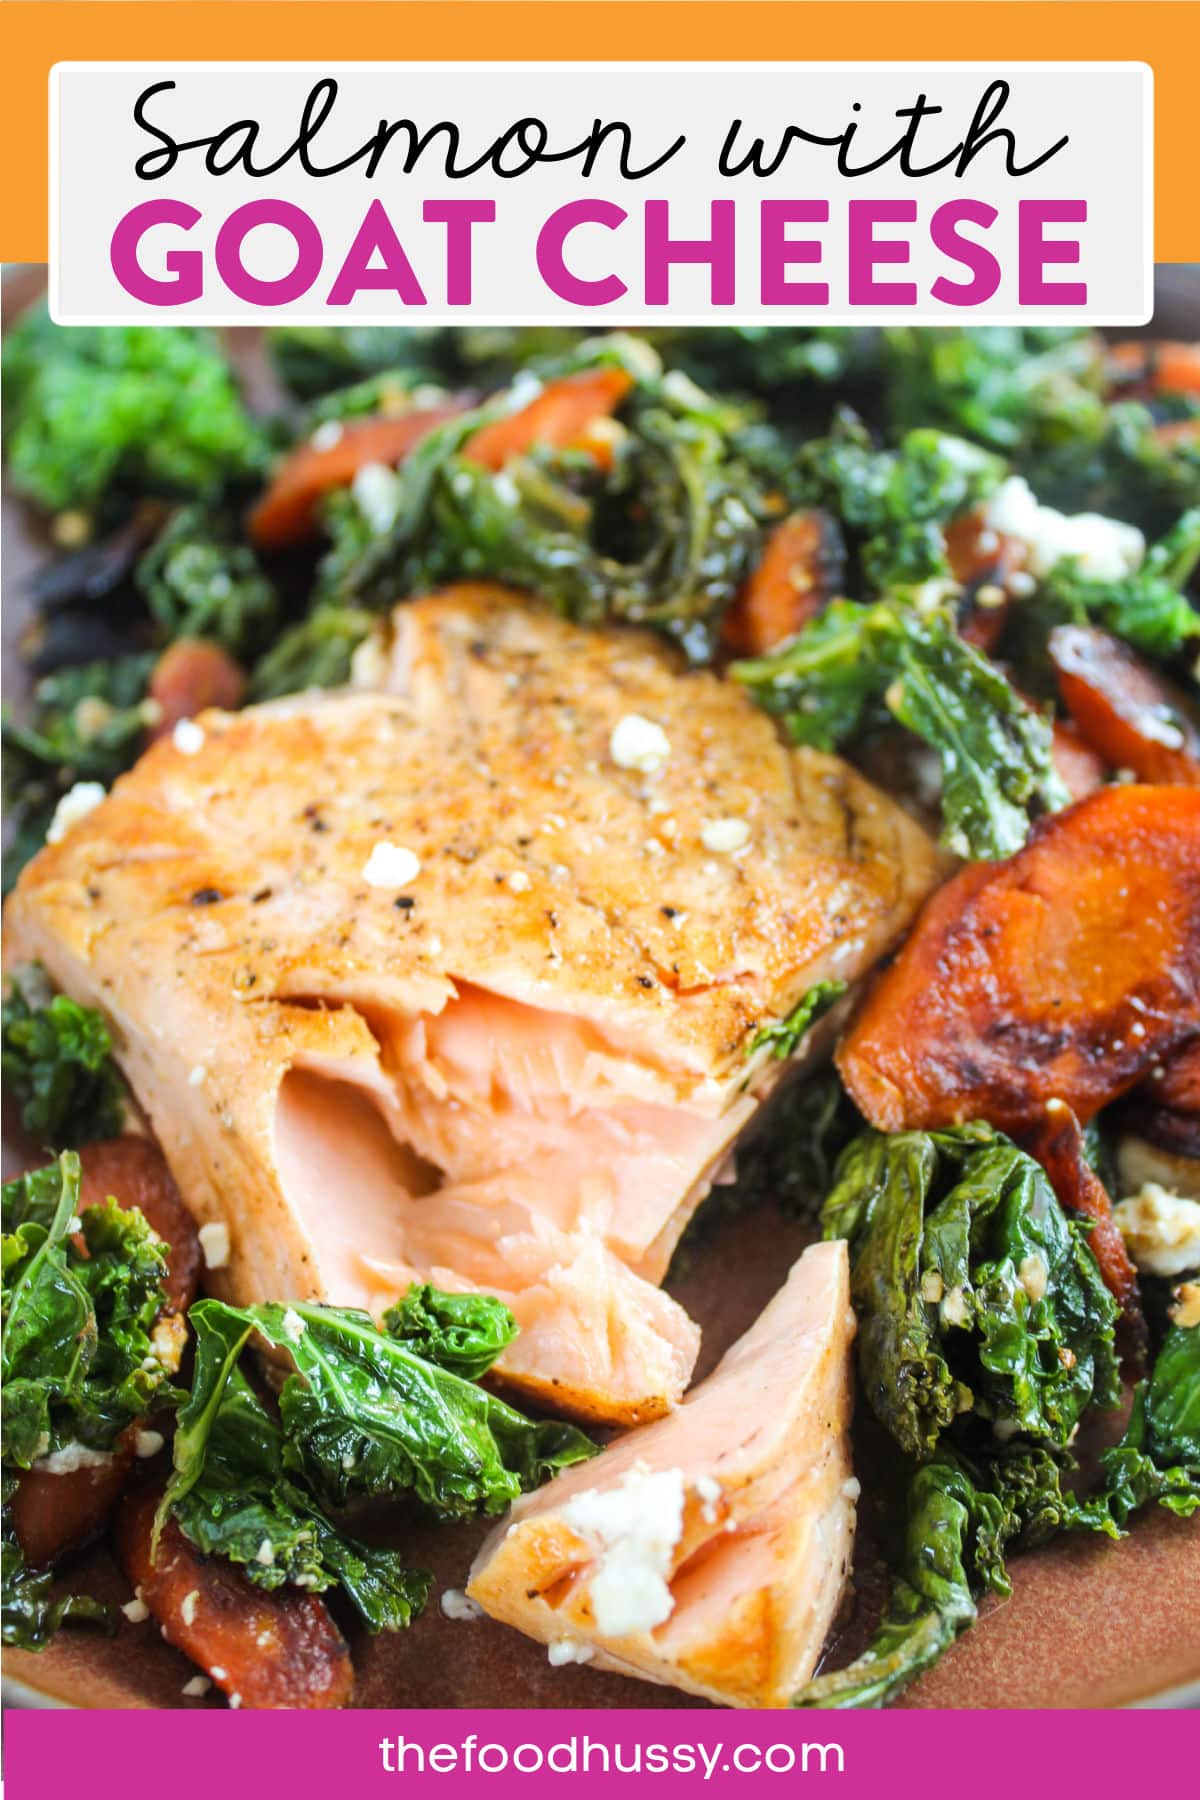 Salmon with Goat Cheese is one of my favorite dinners! Adding veggies like carrots and kale round out the dish so you're getting nutrition and tons of flavor! These "burnt" carrots are caramelized and so tasty! Plus - it's ready in 15 minutes! via @foodhussy